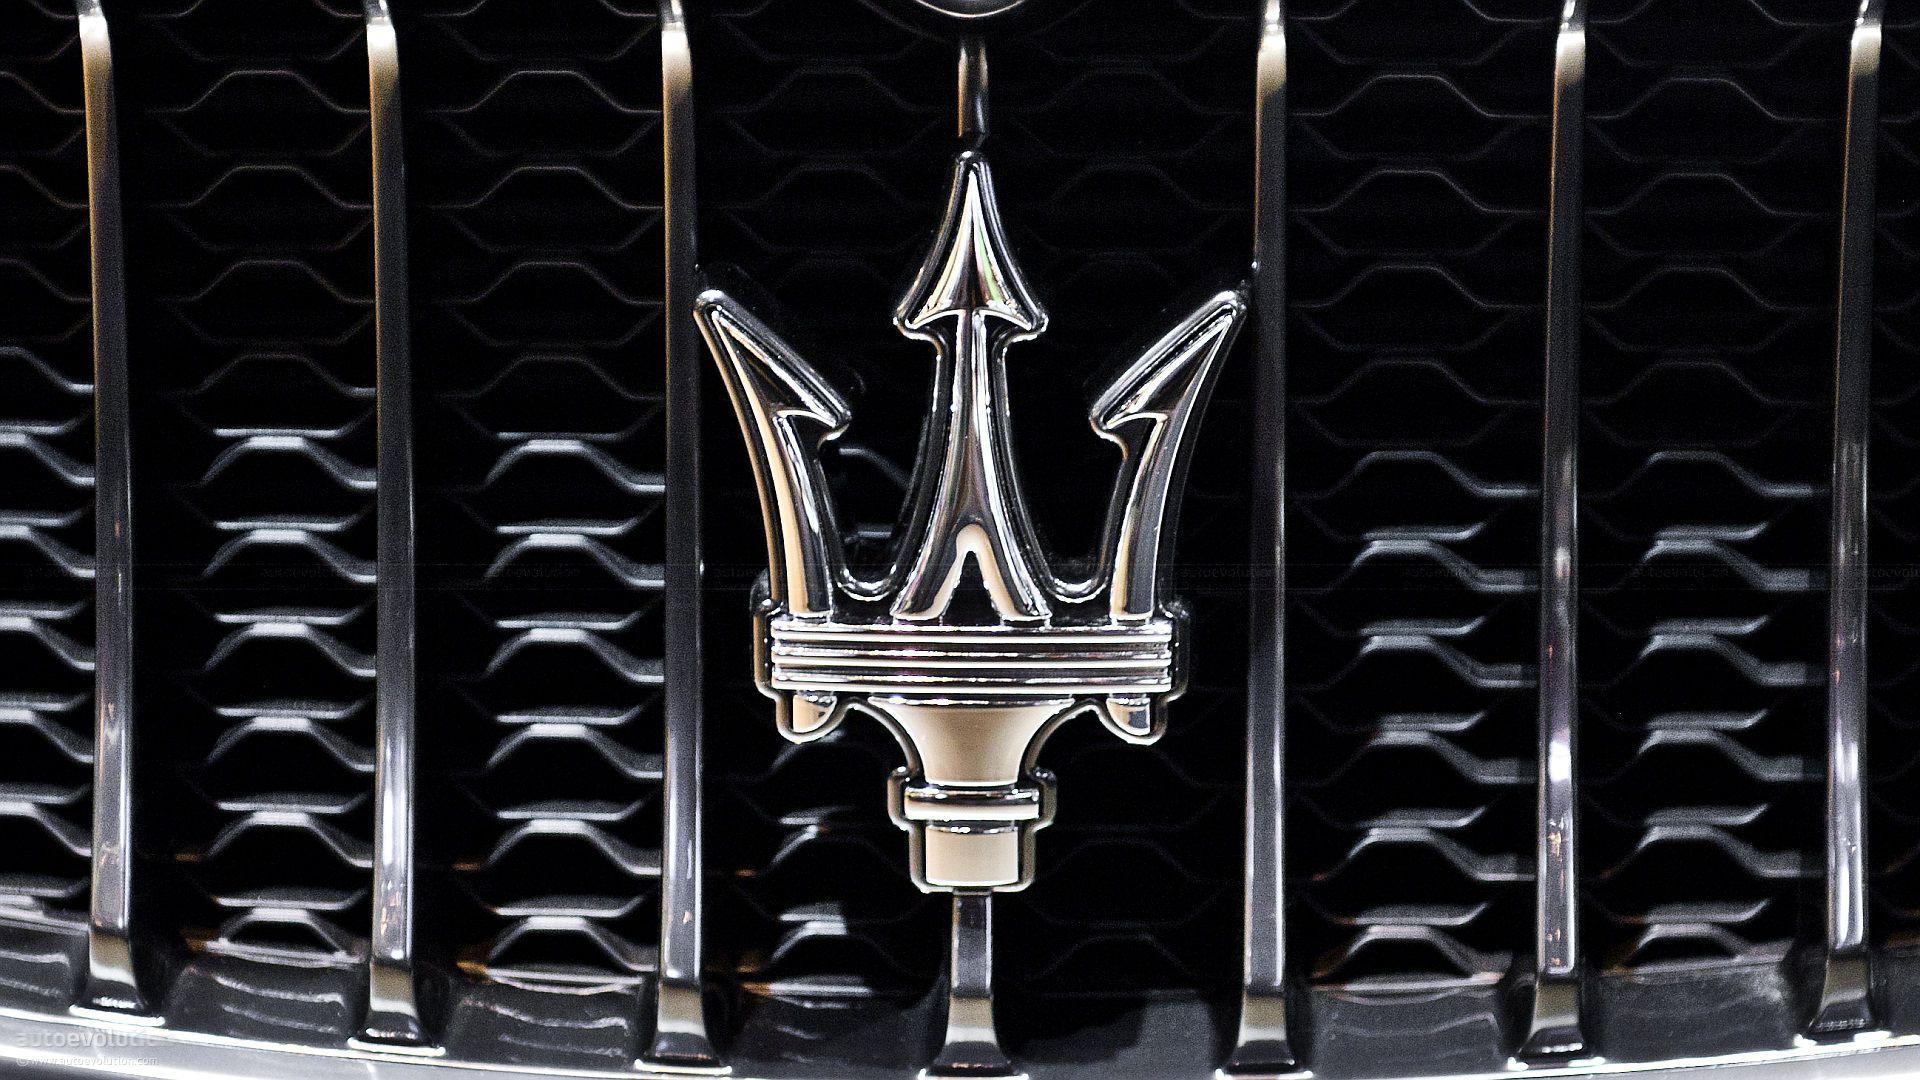 Maserati logo wallpapers pictures